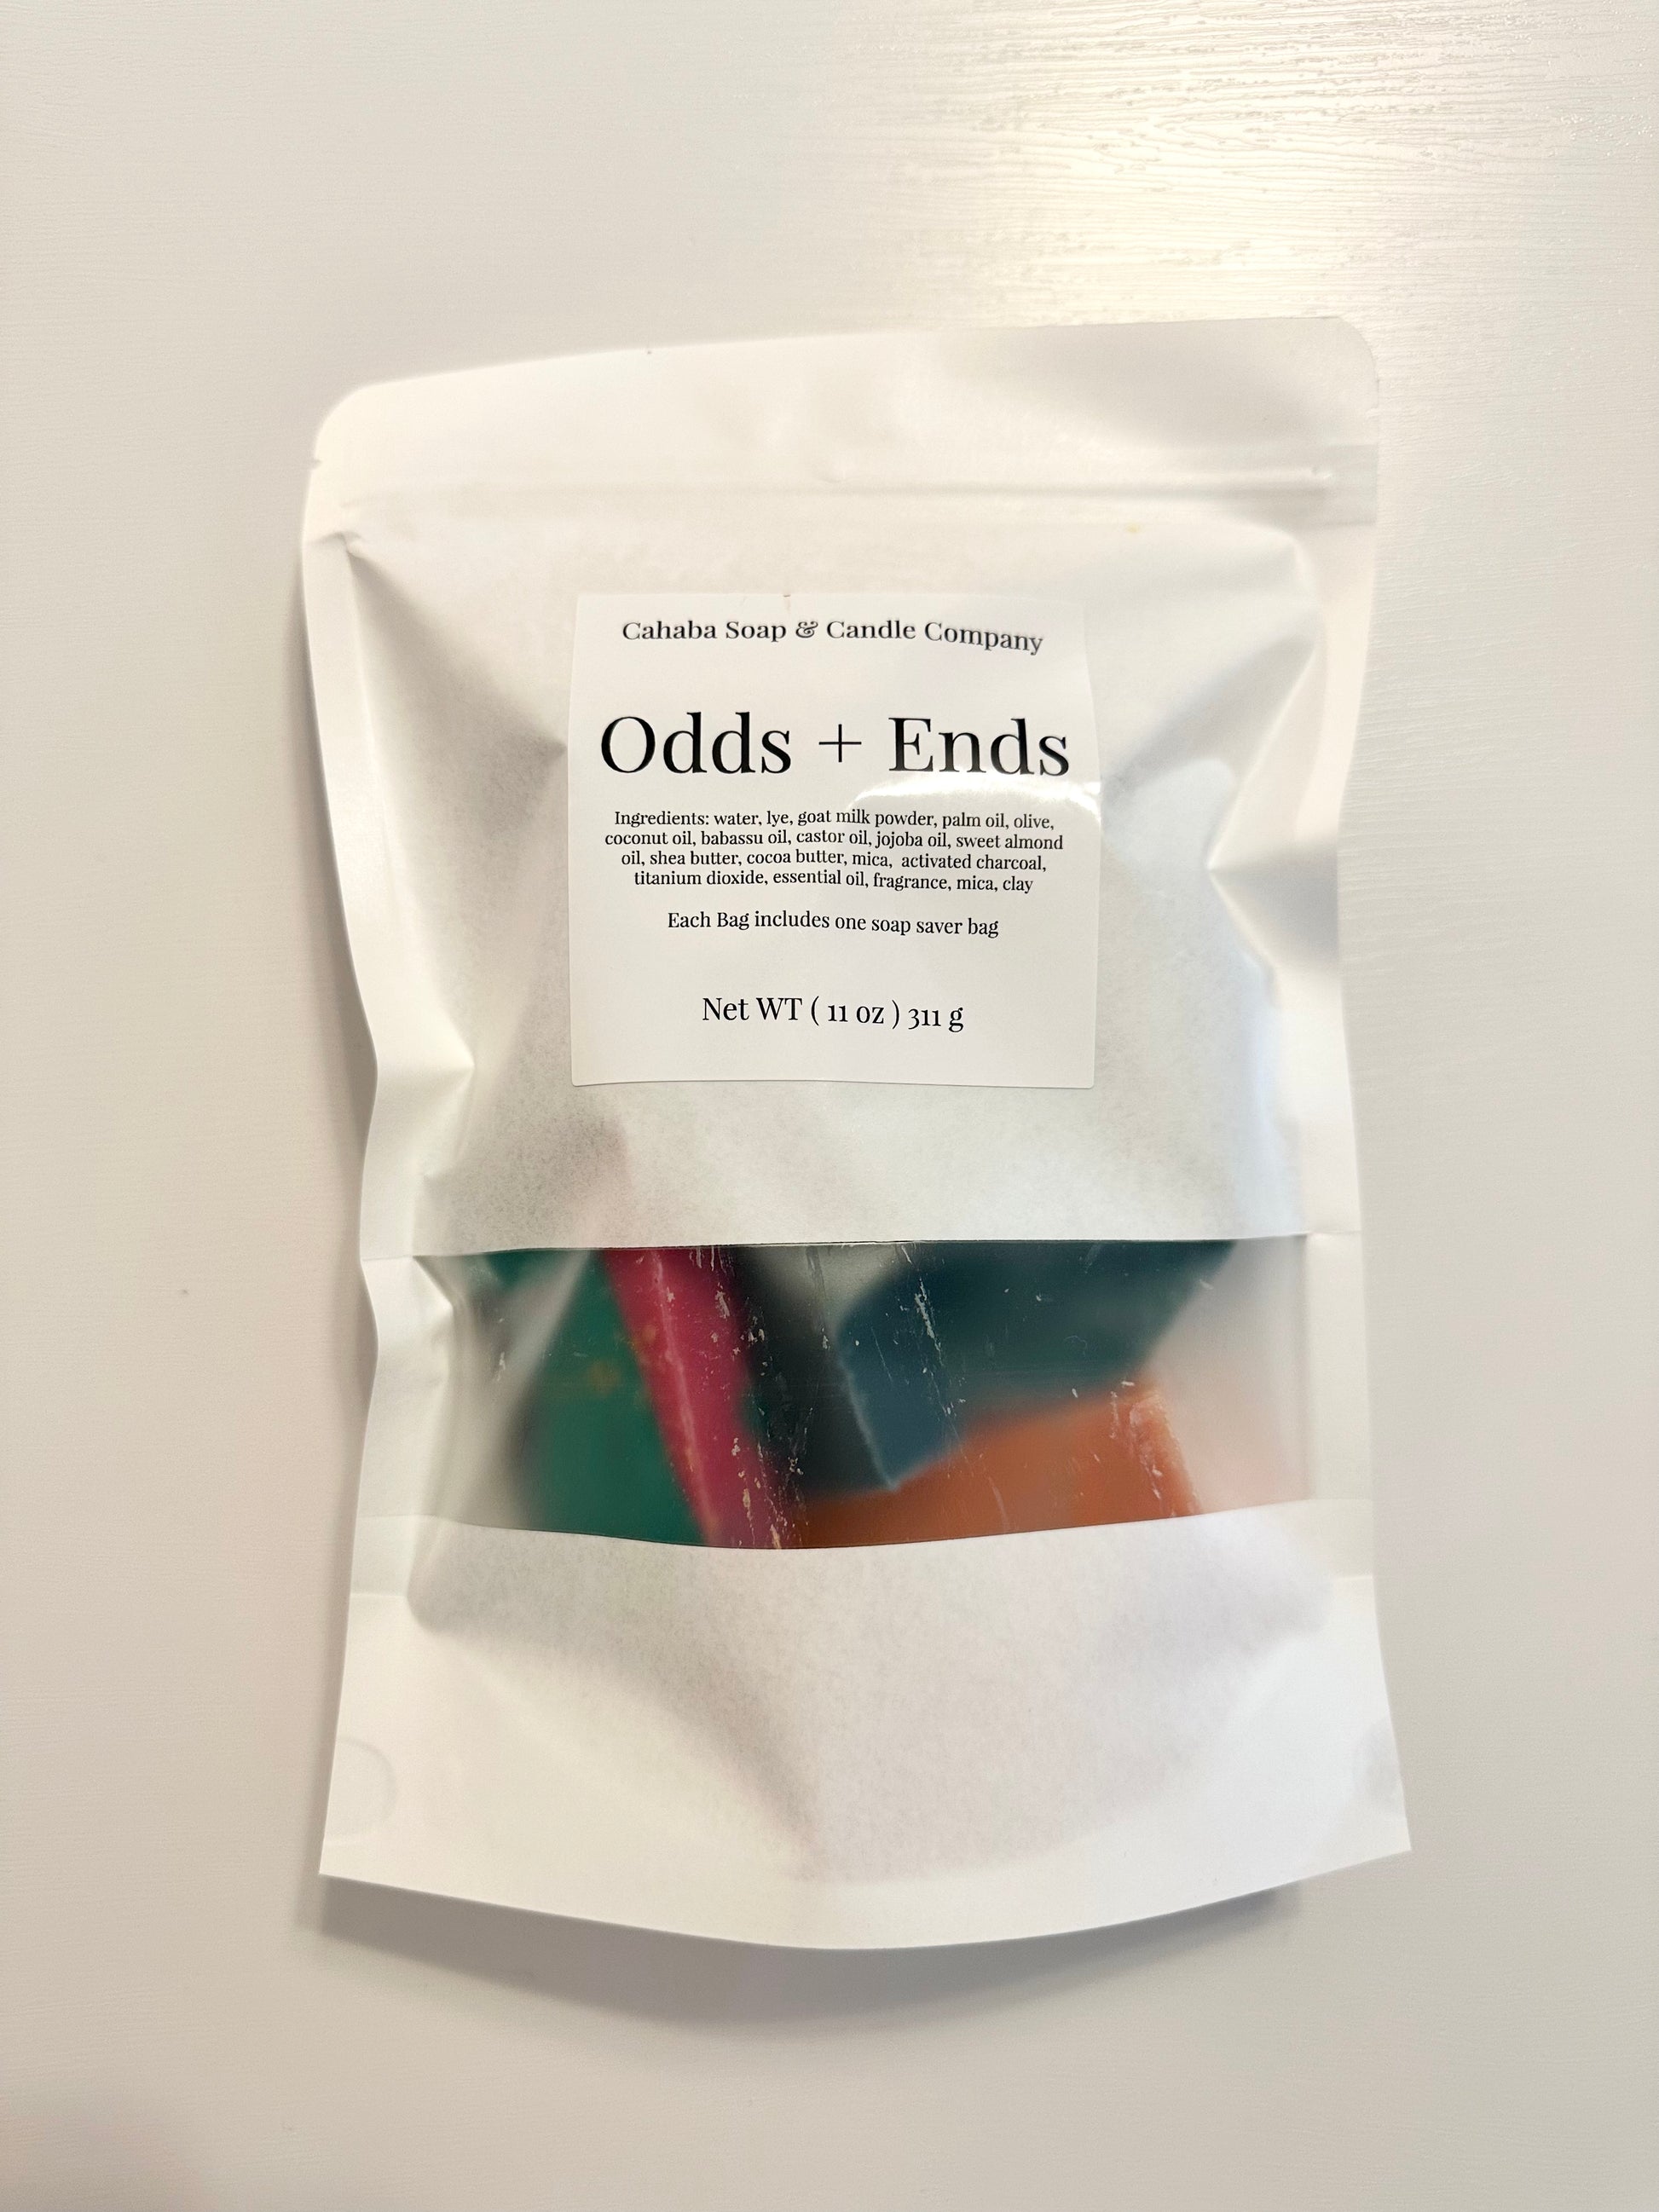 Odds + Ends - Cahaba Soap and Candle Company